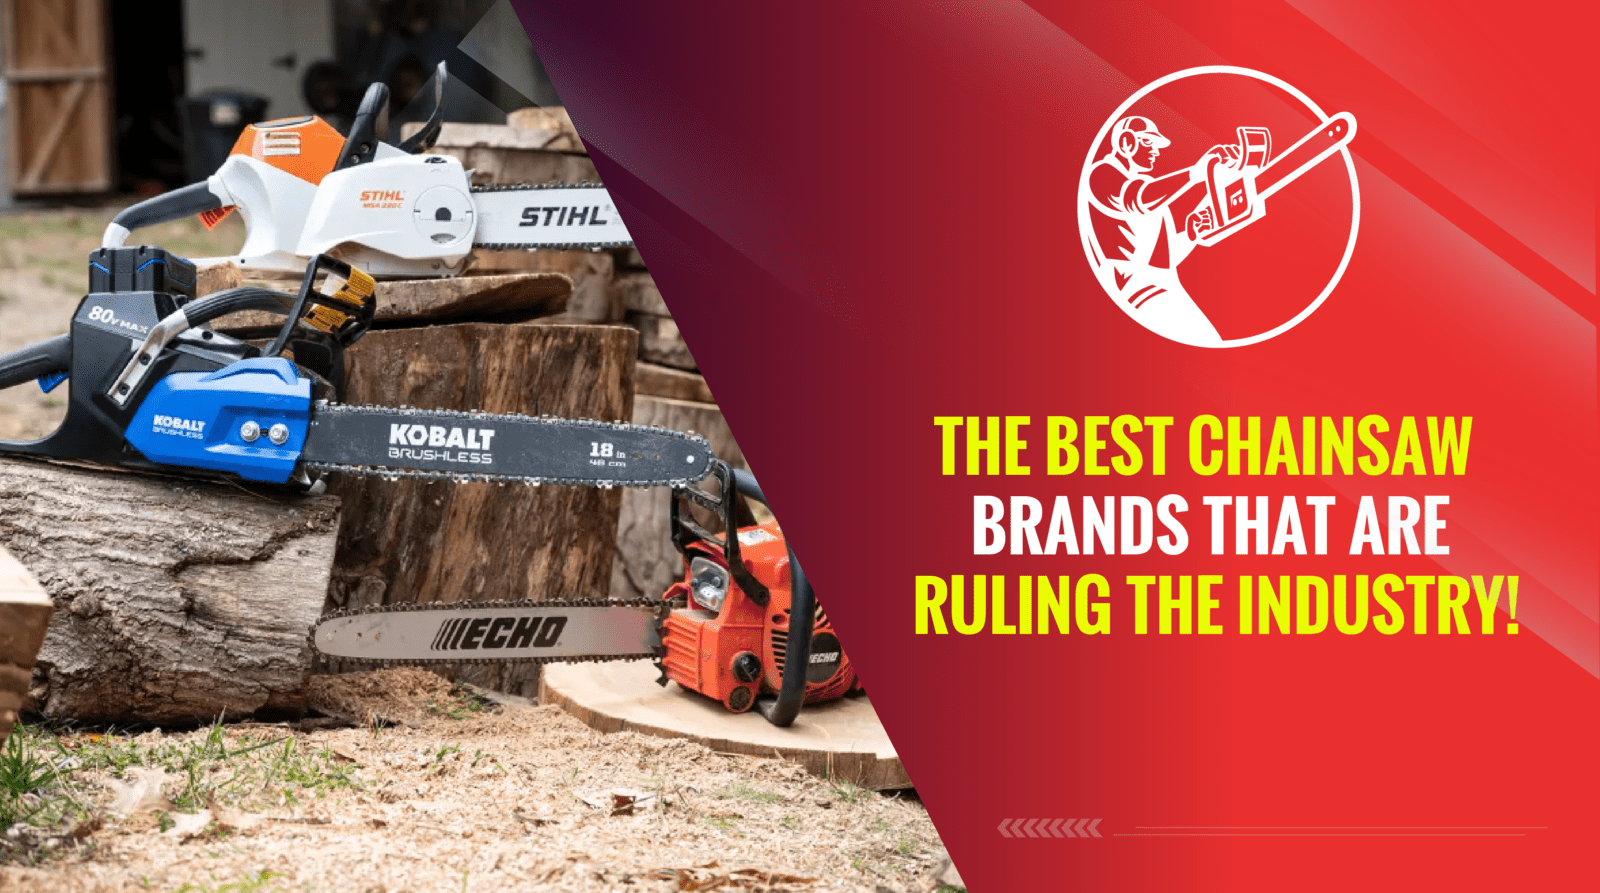 The Best Chainsaw Brands That Are Ruling the Industry!